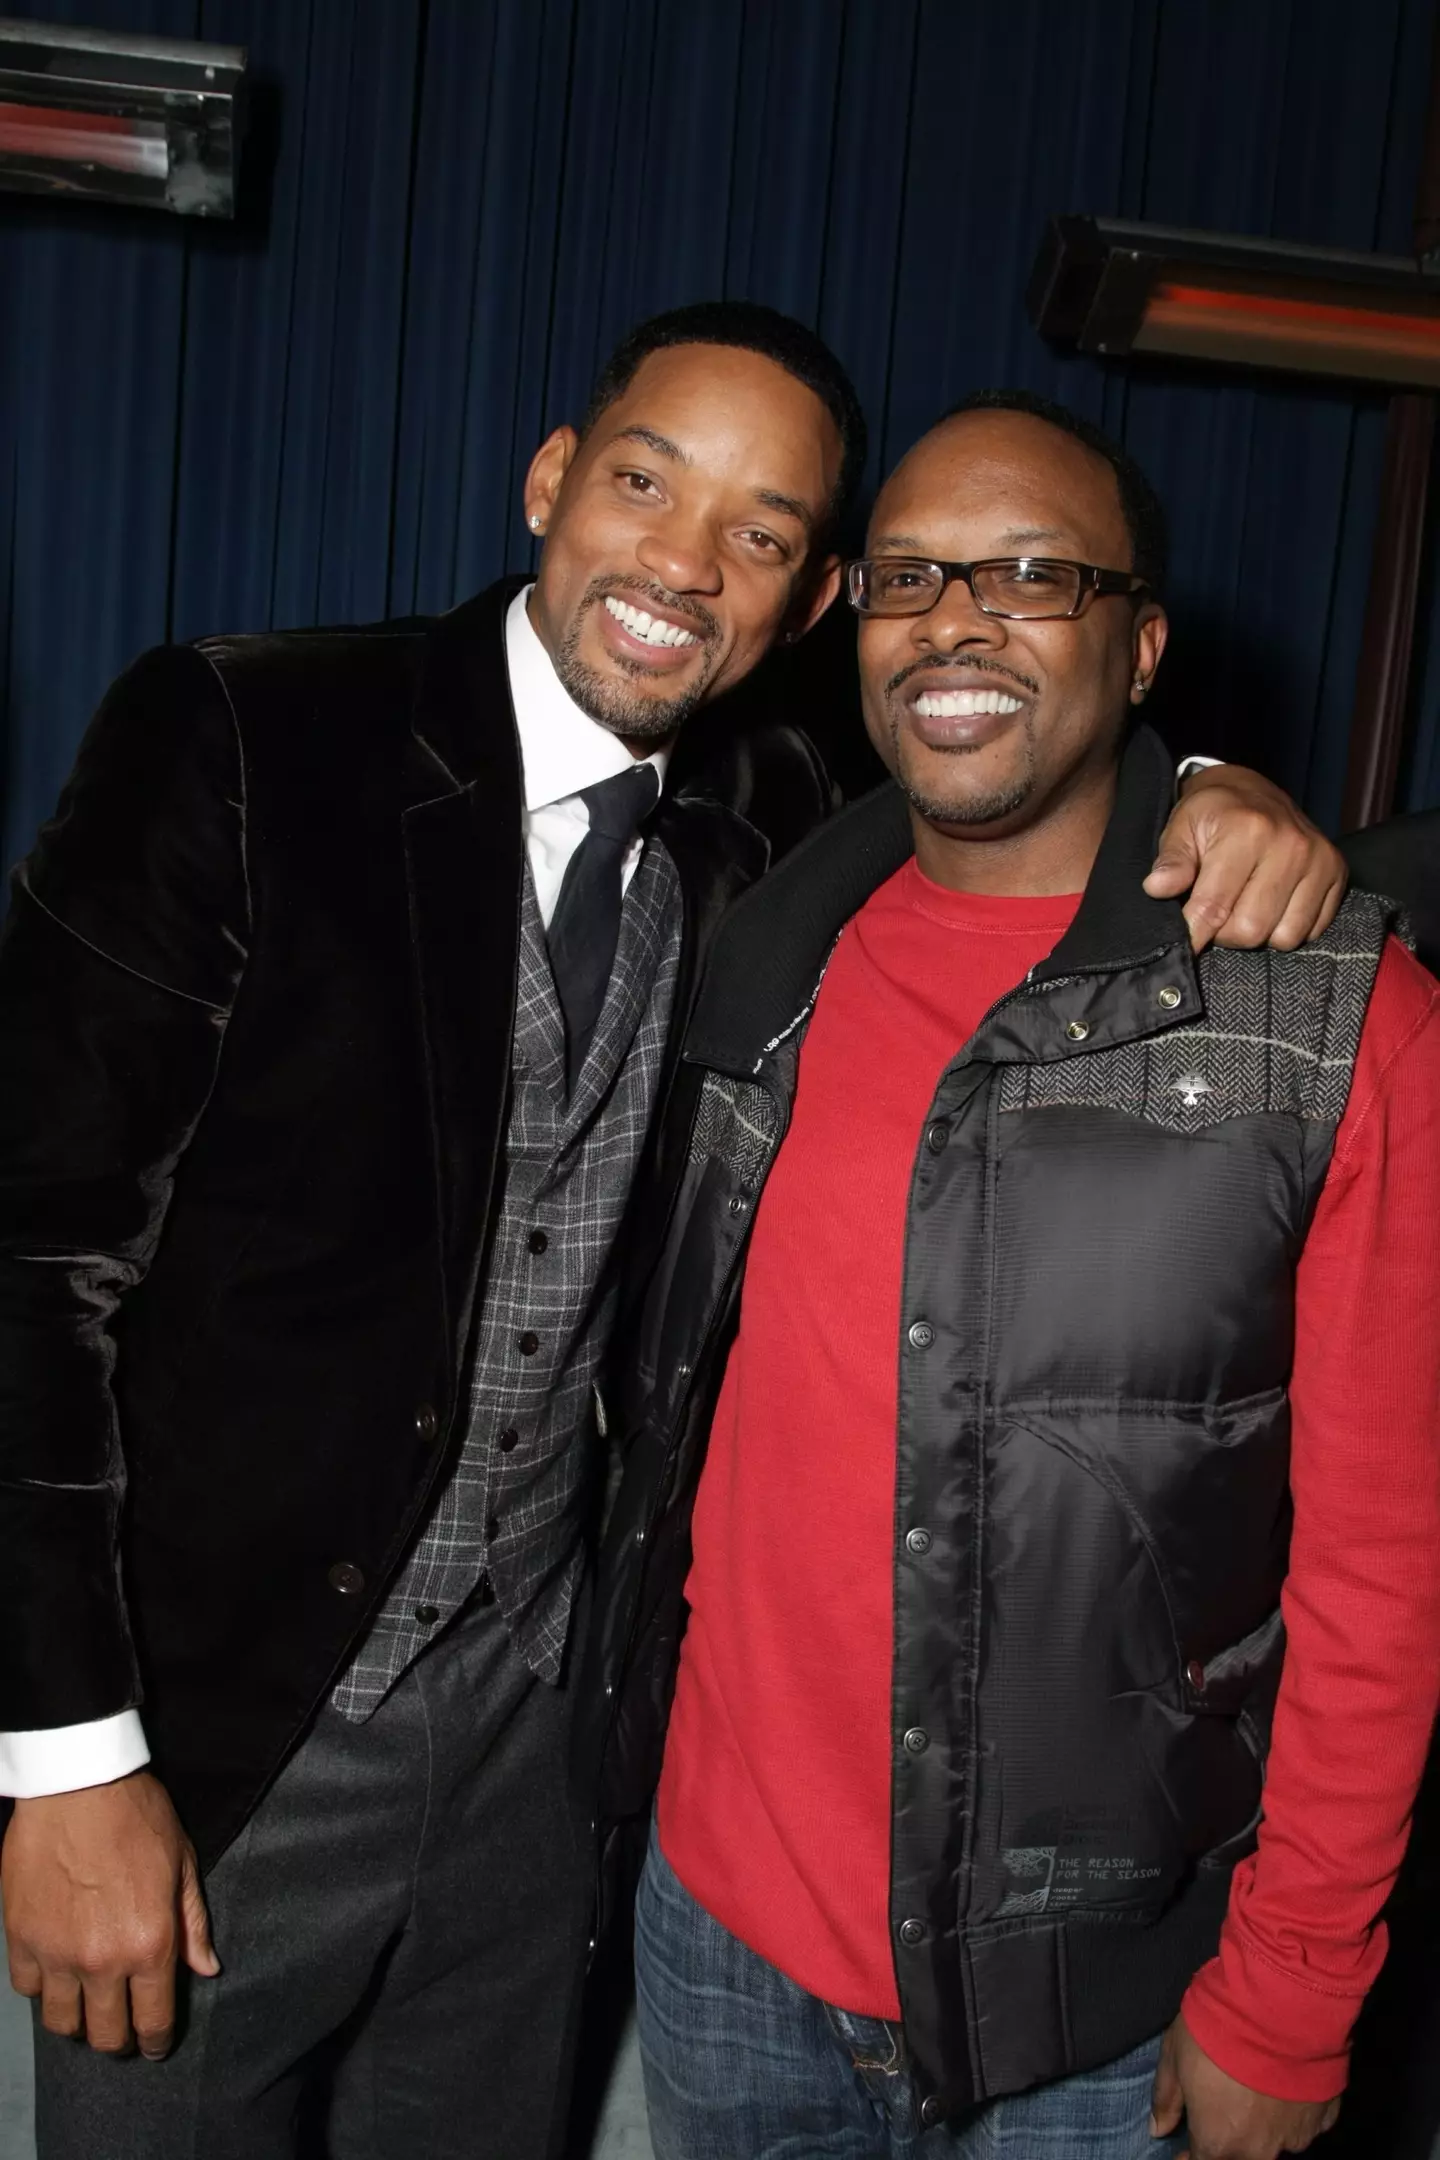 Will Smith and DJ Jazzy Jeff last performed together in 2019.